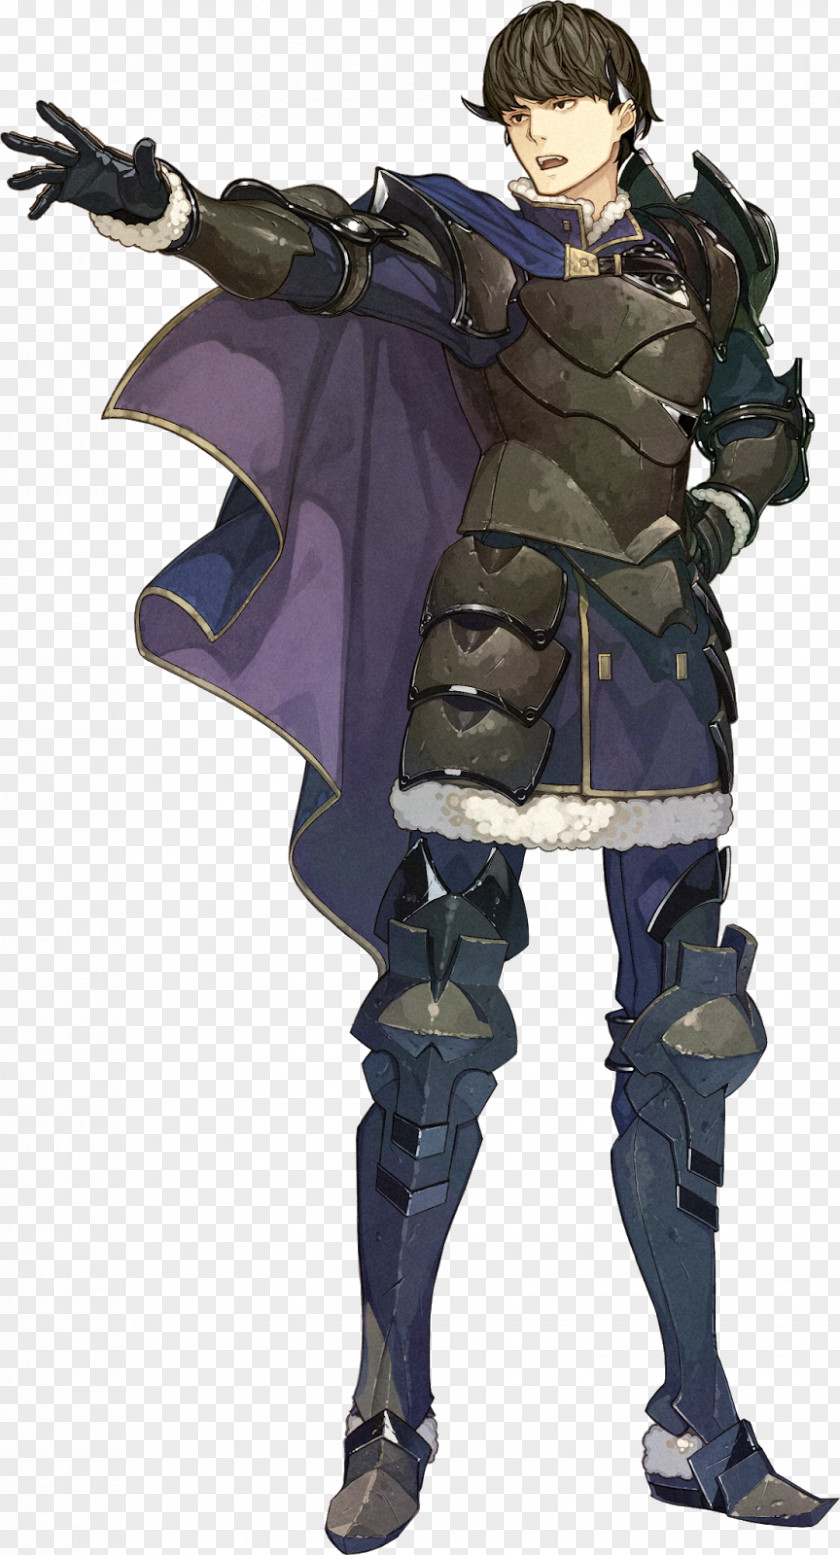 Headstone Artwork Fire Emblem Echoes: Shadows Of Valentia Gaiden Heroes Video Game Minecraft PNG